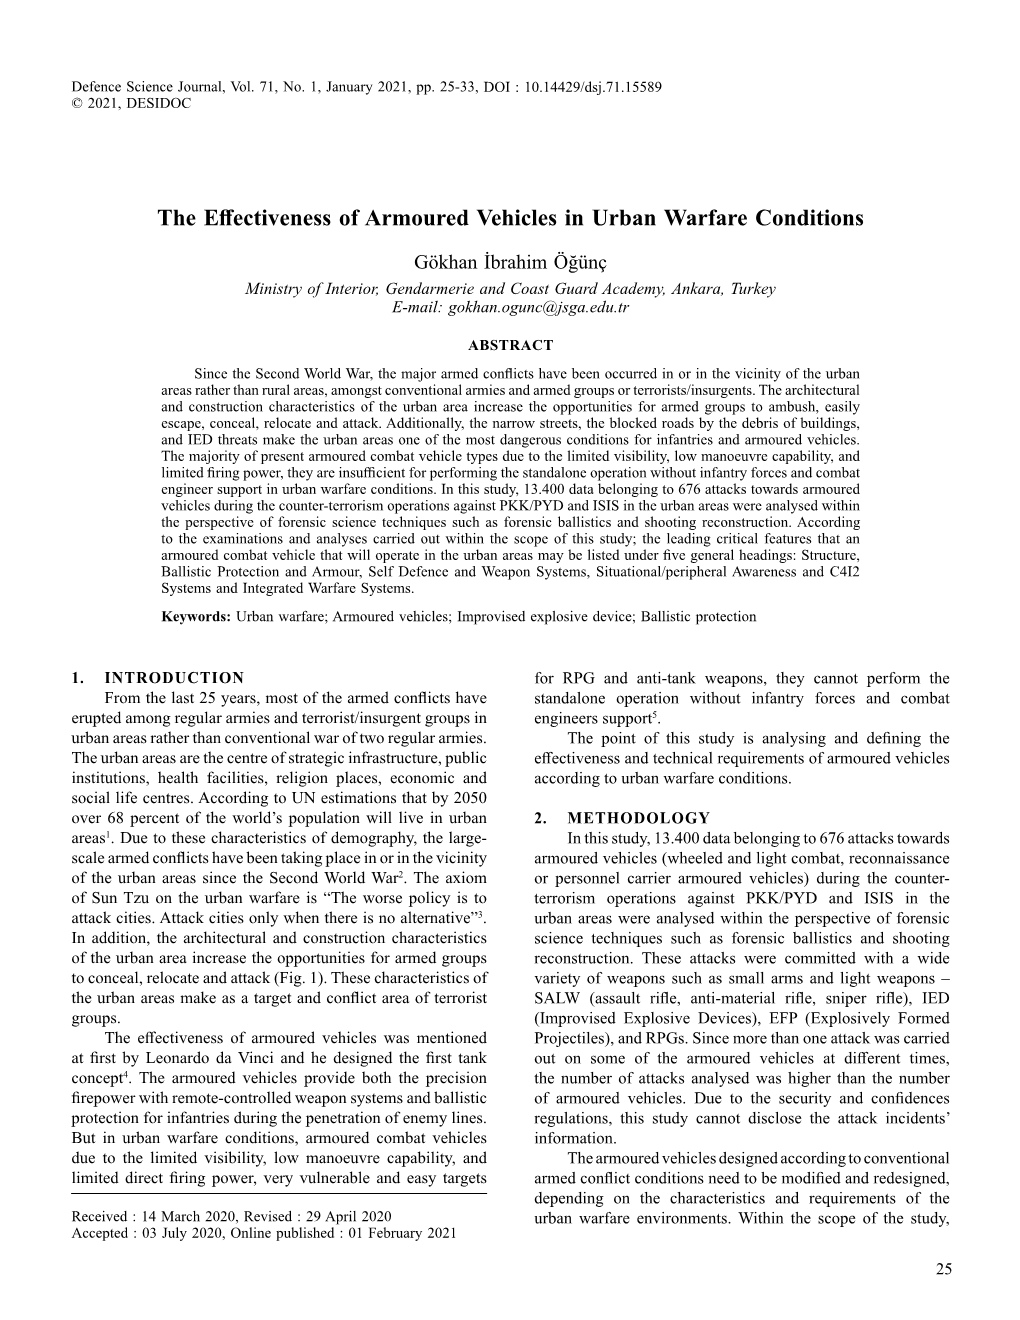 The Effectiveness of Armoured Vehicles in Urban Warfare Conditions